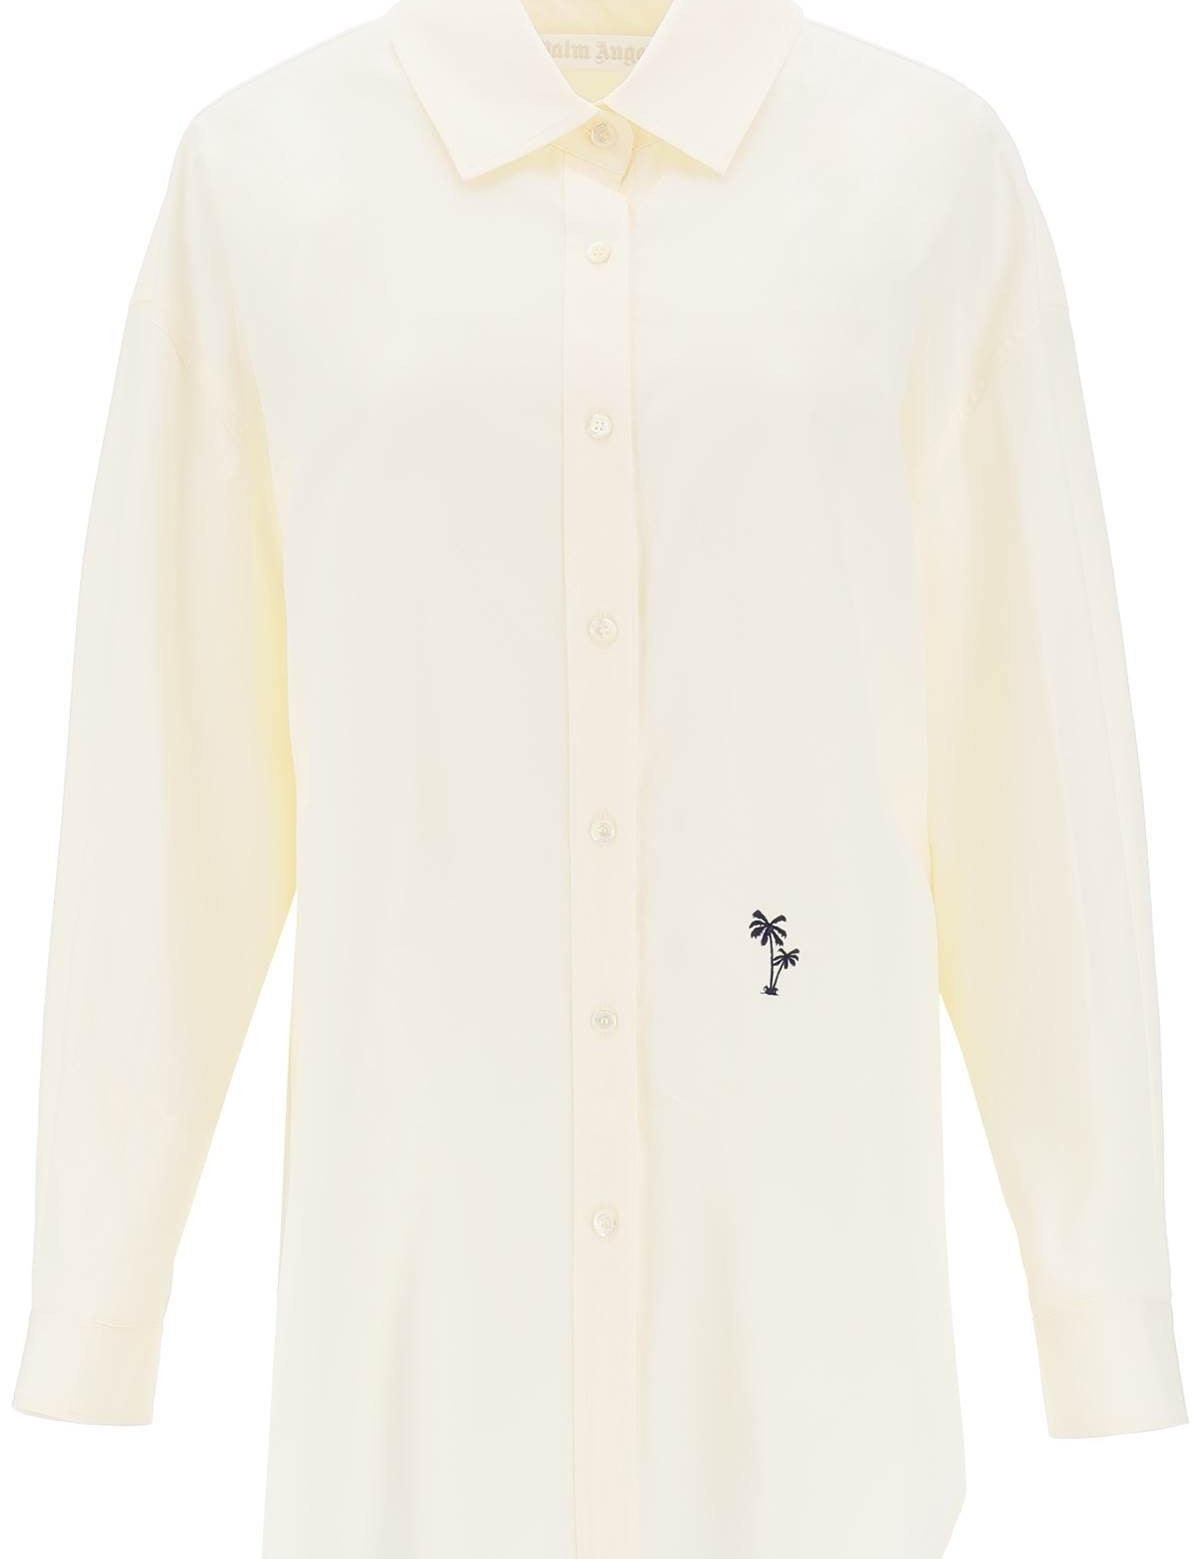 palm-angels-poplin-shirt-with-palm-embroidery.jpg